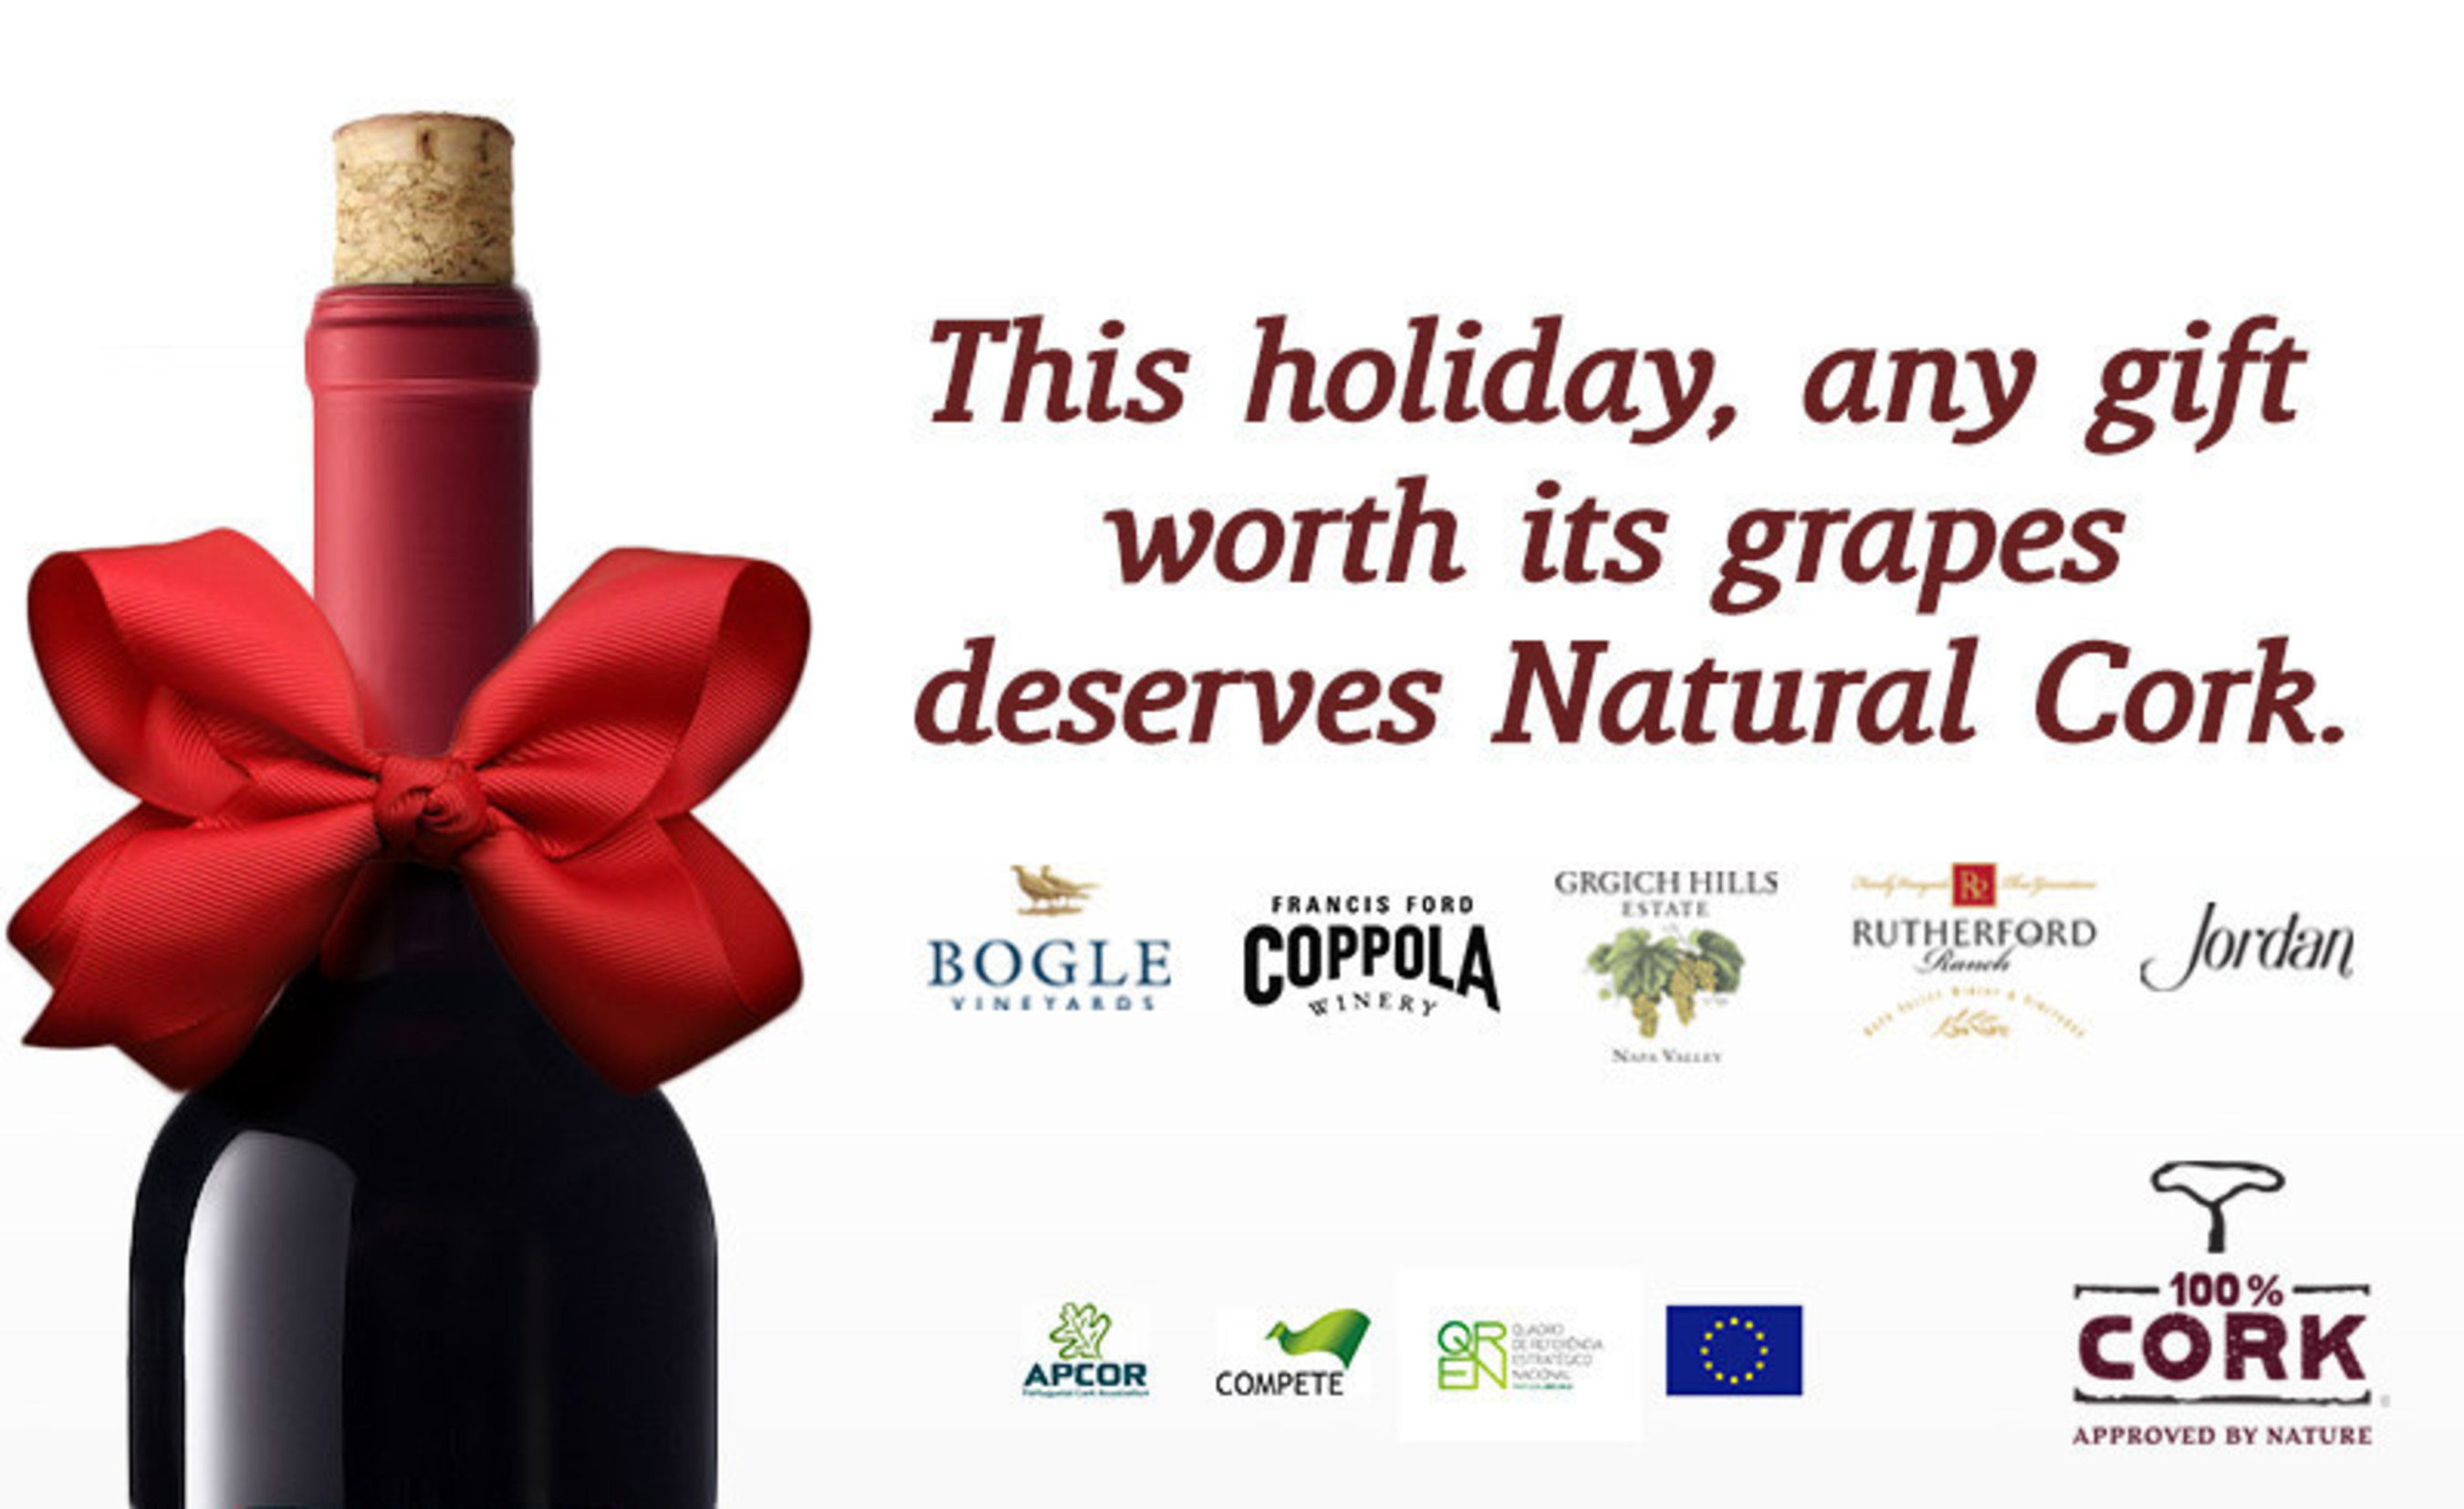 Leading Wineries Join Cork Industry to Highlight Consumer Preference for Natural Cork